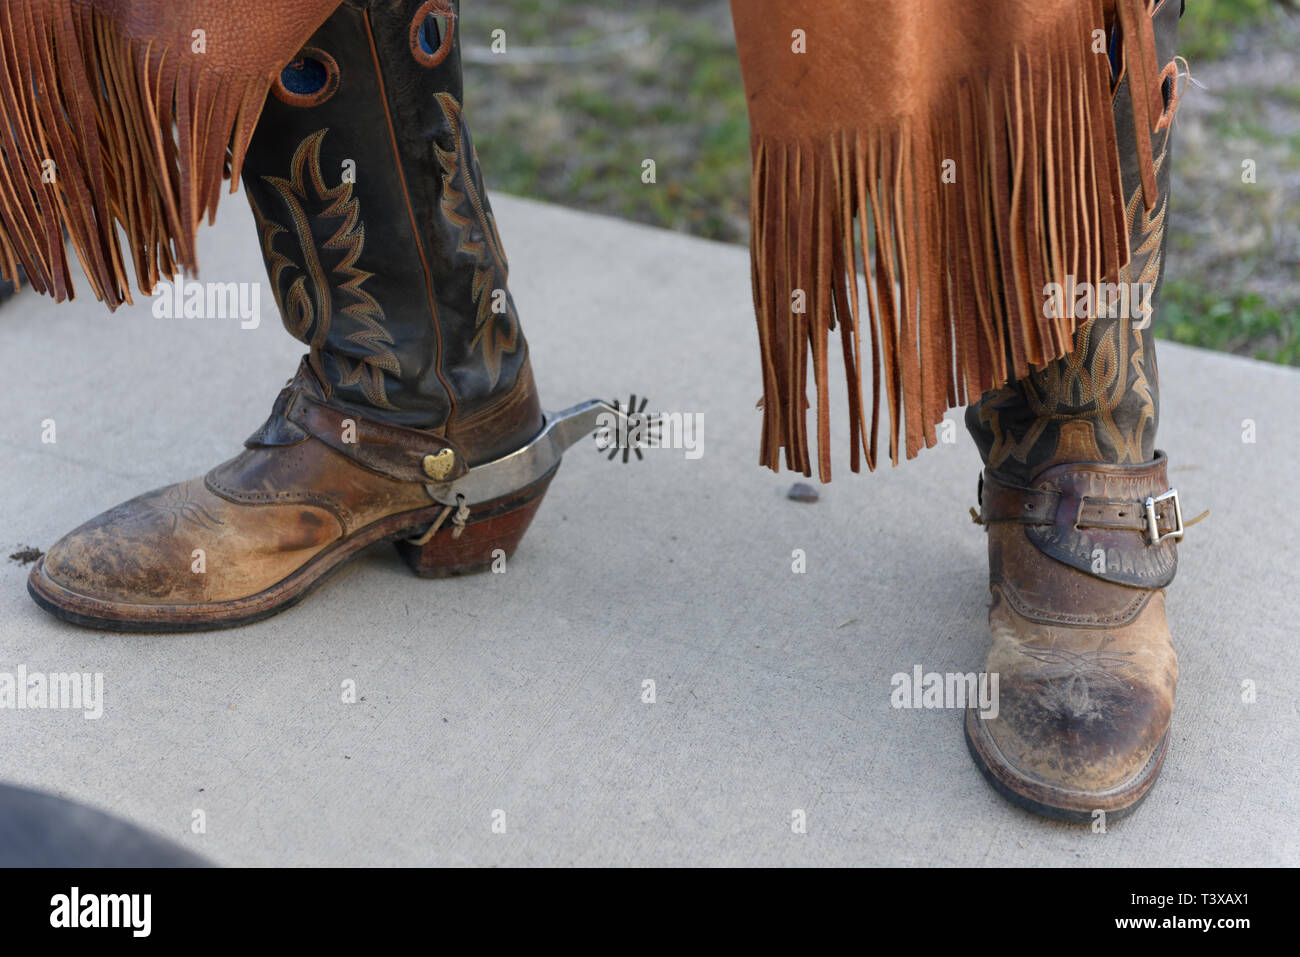 Old worn cowboy boots with spurs on an old cowboy wearing leather chaps. Stock Photo